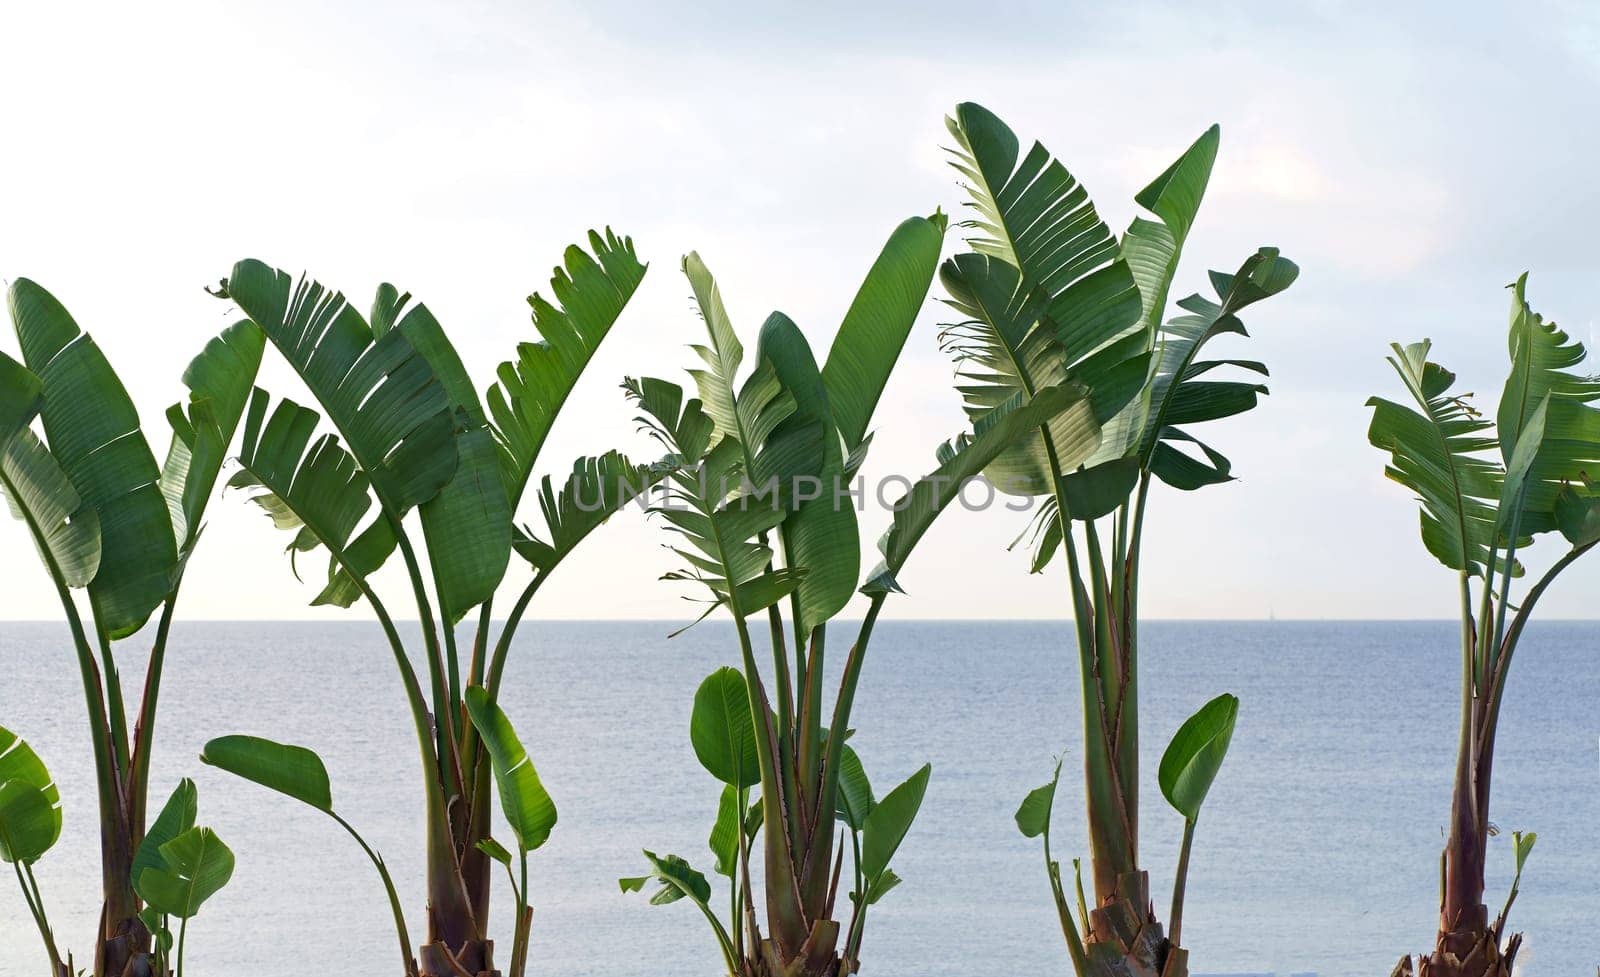 Sea. Beach. Banana palms. The picture symbolizes relaxation by the sea, tropical climate, exotic plants by aprilphoto